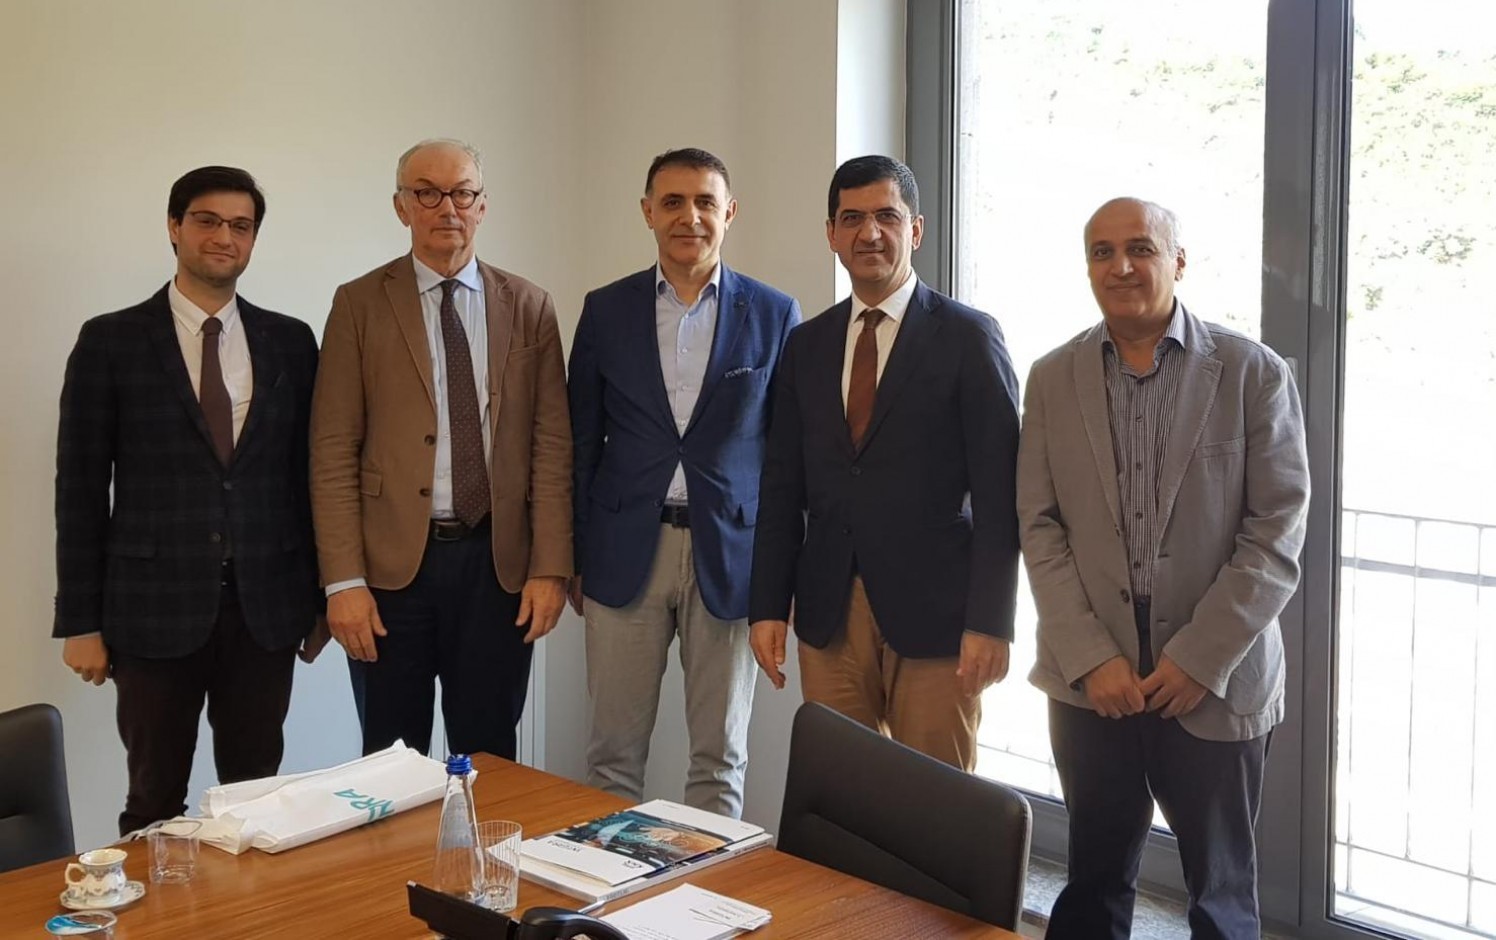 News As a result of Interra R&D cooperation with Turkish-German university